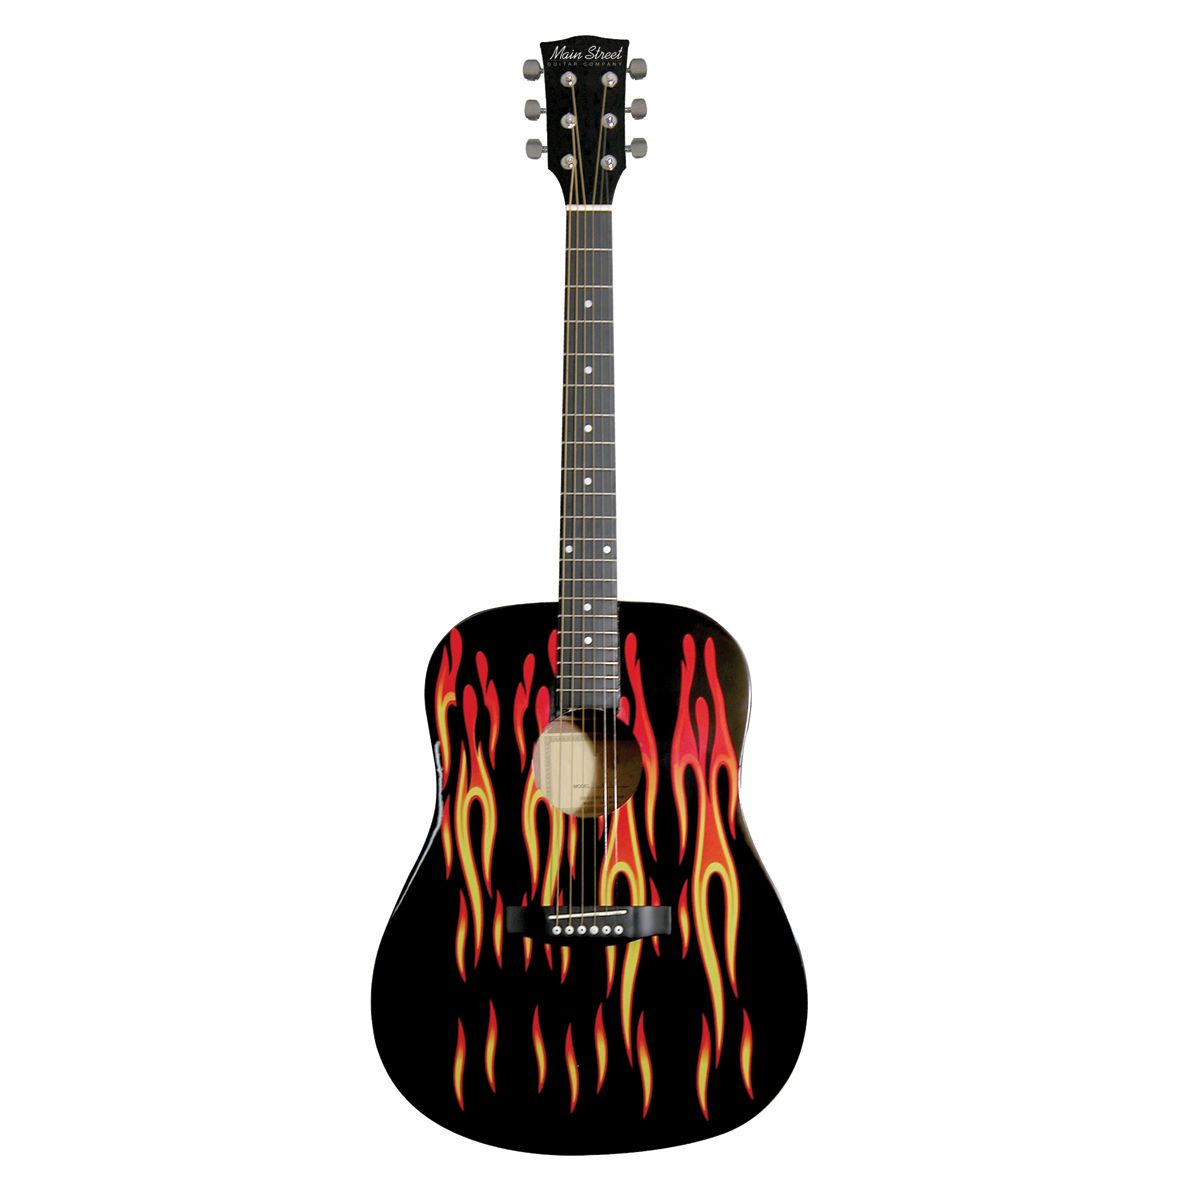 Main Street Dreadnought Acoustic Guitar with Flames on High-Gloss Black Finish